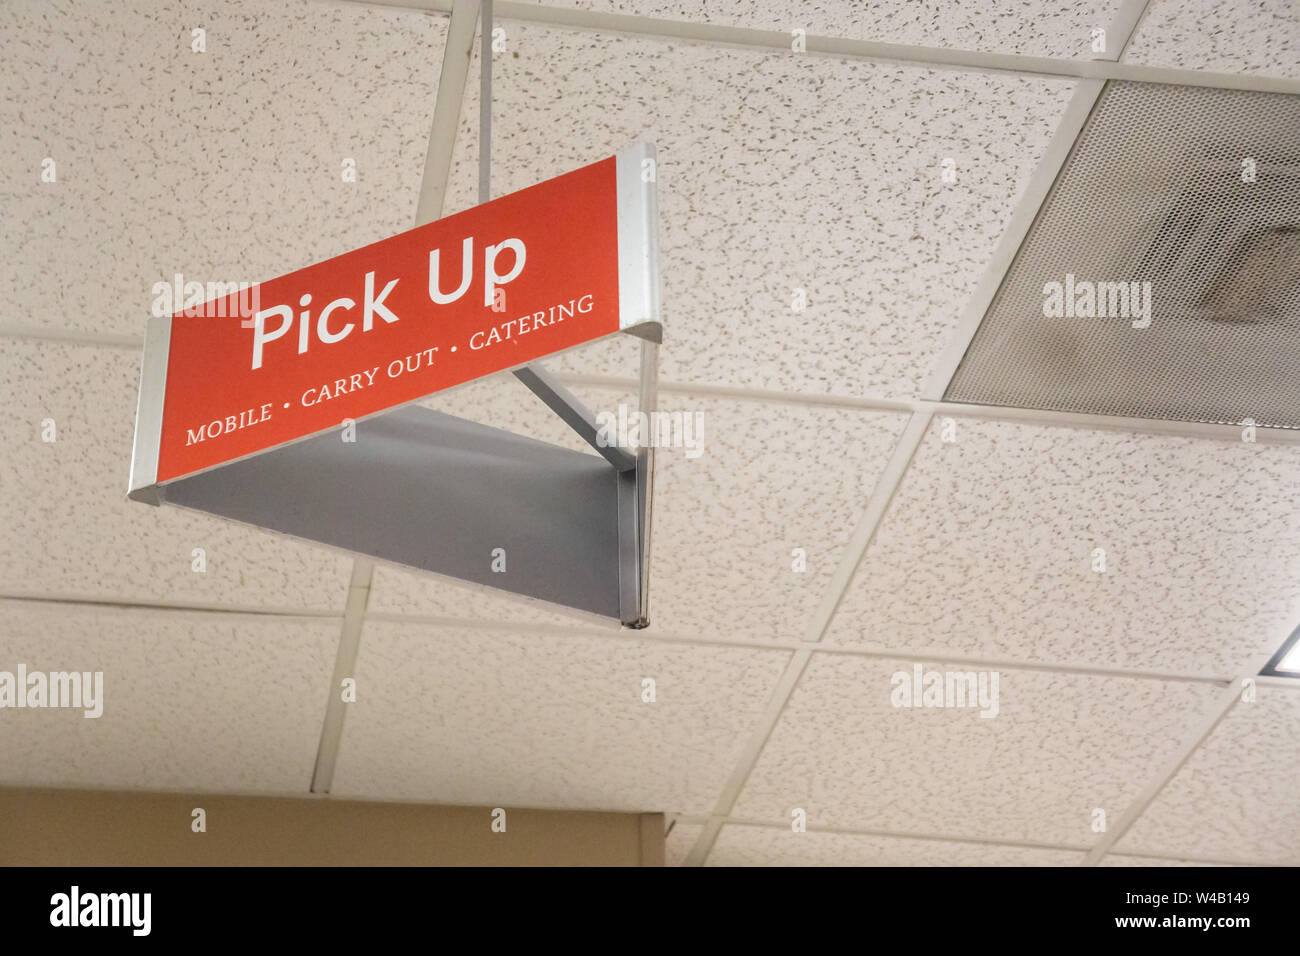 Atlanta, GA - July 26th 2019: Red pick up carry out sign on tile ceiling for mobile app orders at Chick-Fil-A. Jump the line and order ahead. Stock Photo